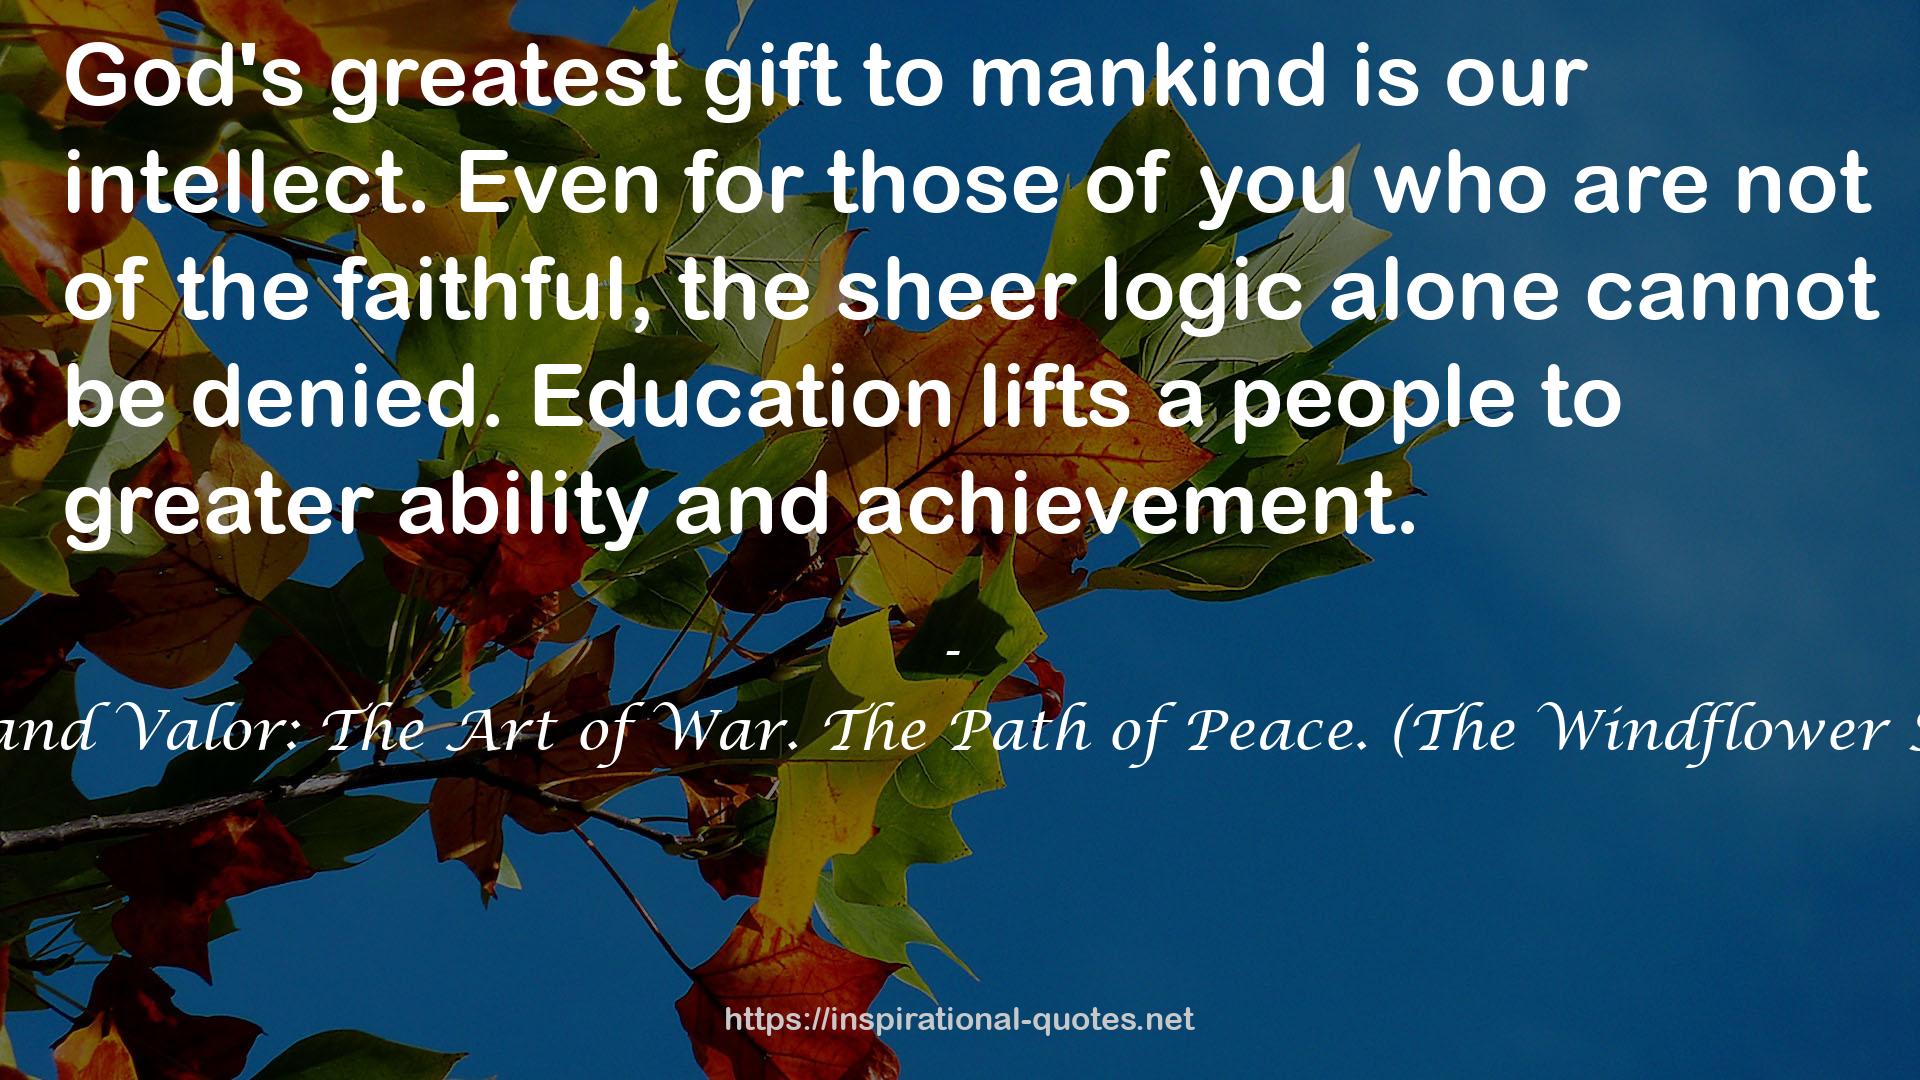 Of Wisdom and Valor: The Art of War. The Path of Peace. (The Windflower Saga Book 2) QUOTES